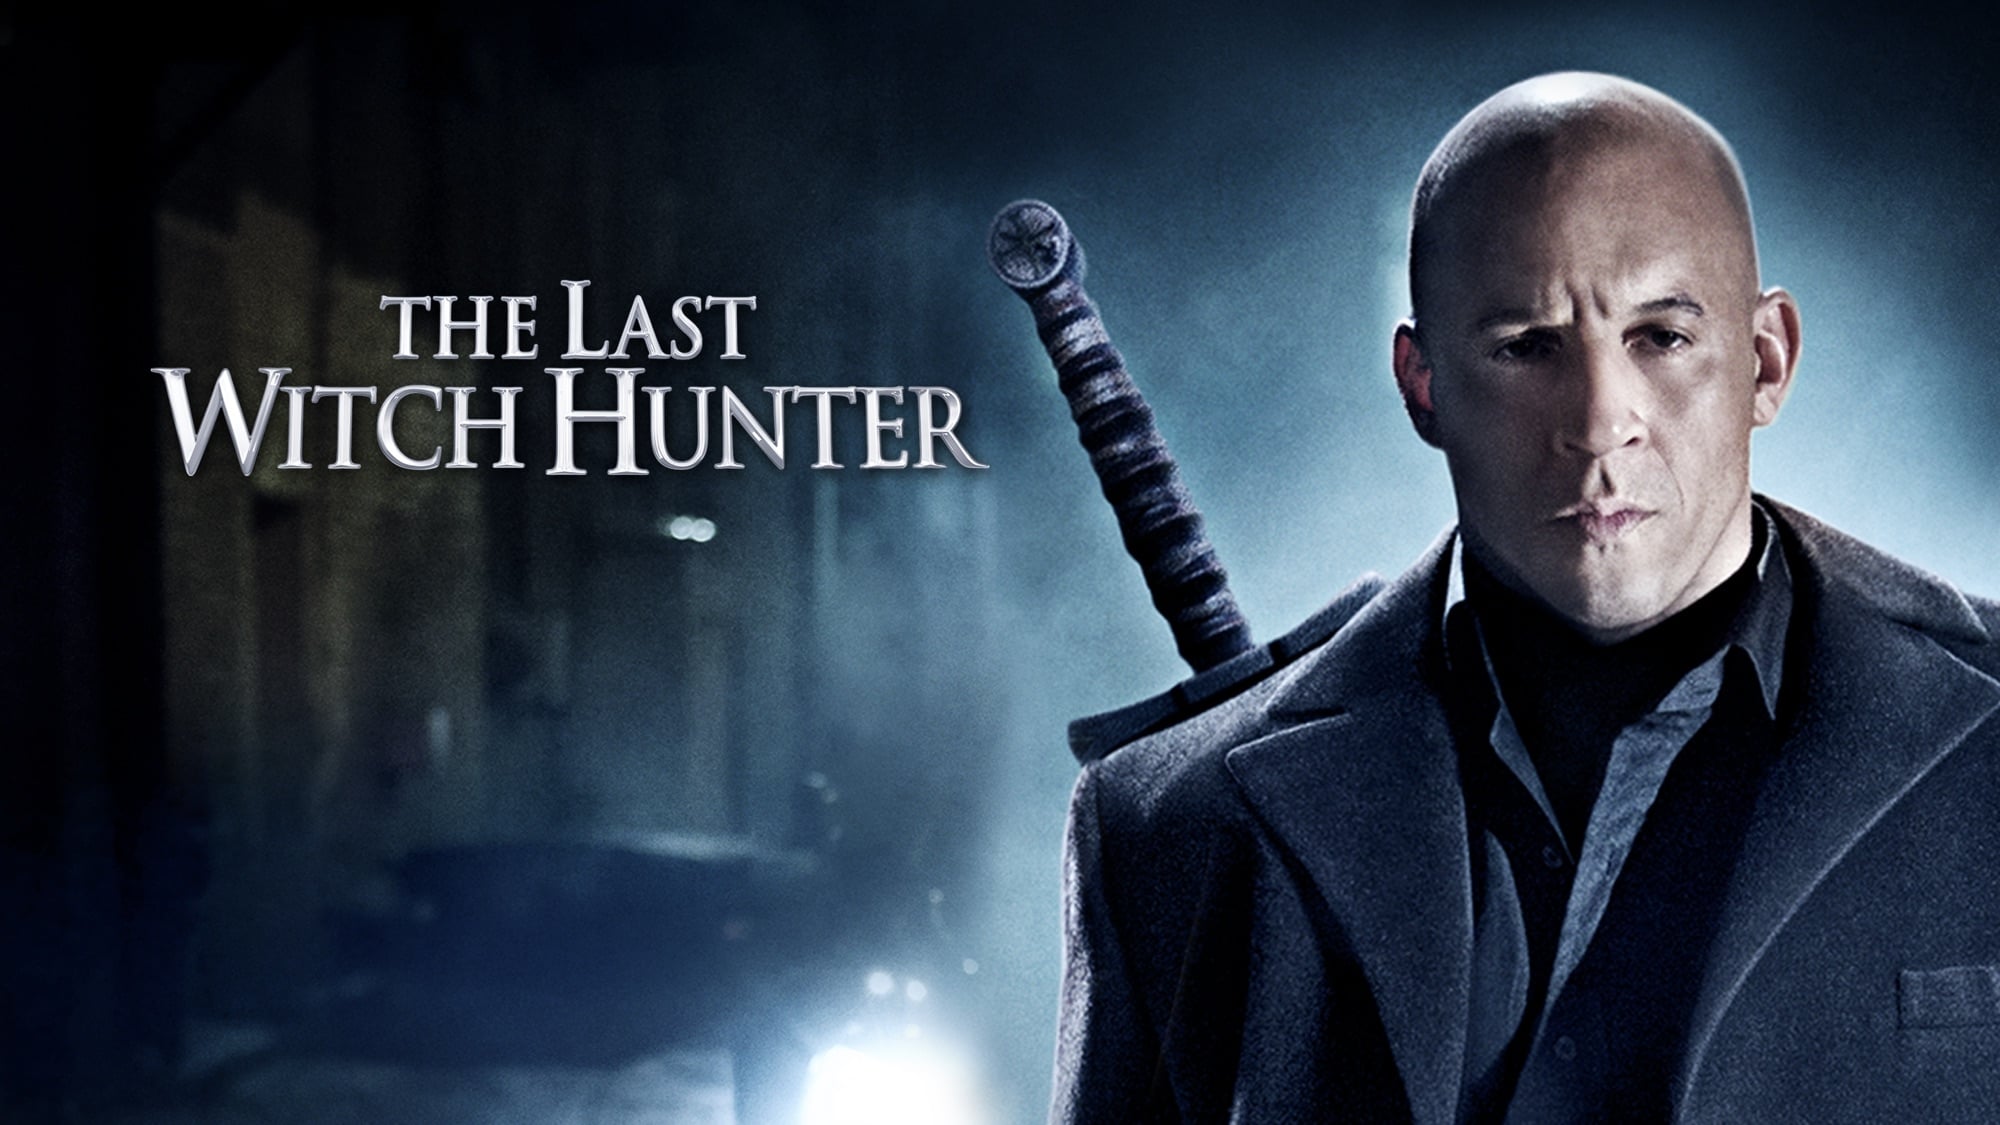 The Last Witch Hunter (English) movie  hd 1080p